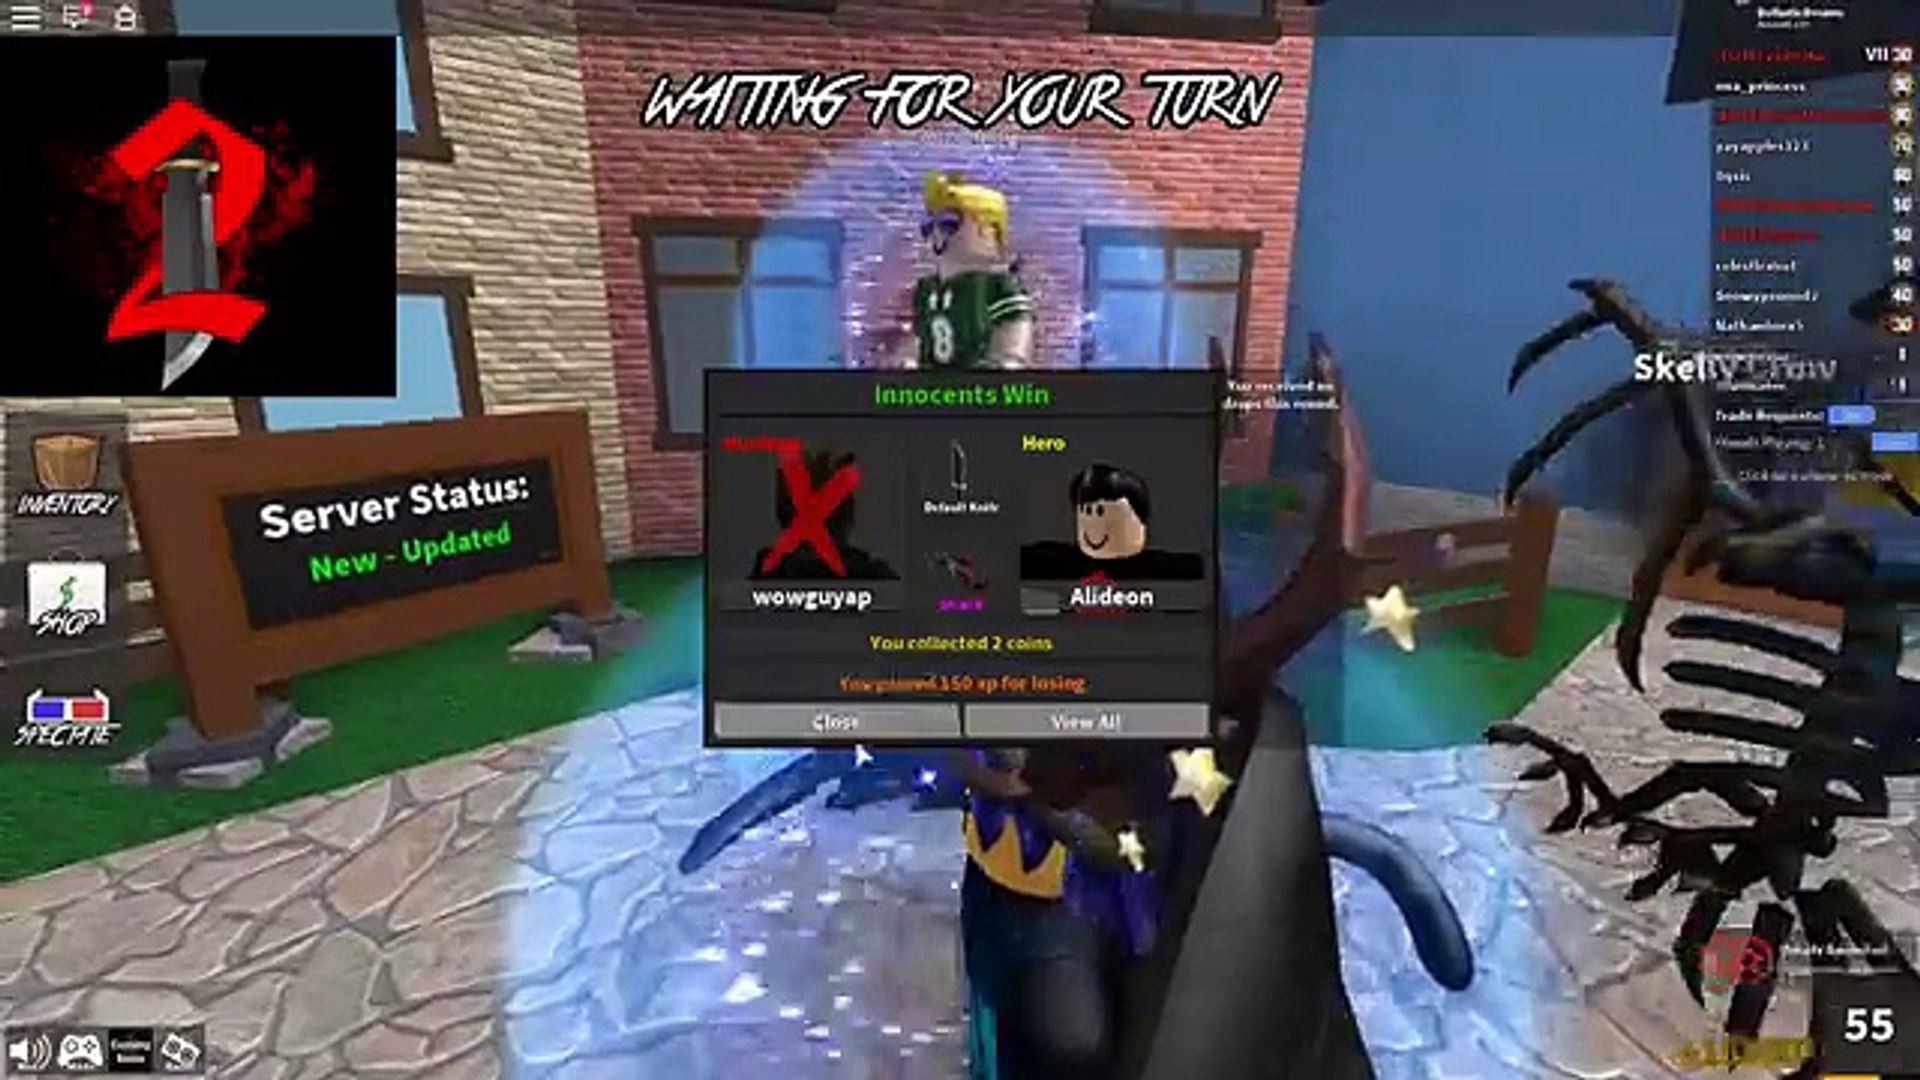 New Police Office Map Roblox Murder Mystery 2 With Gamer Chad Dollastic Plays Video Dailymotion - sheriff lastic the protector roblox murder mystery 2 with gamer chad dollastic plays